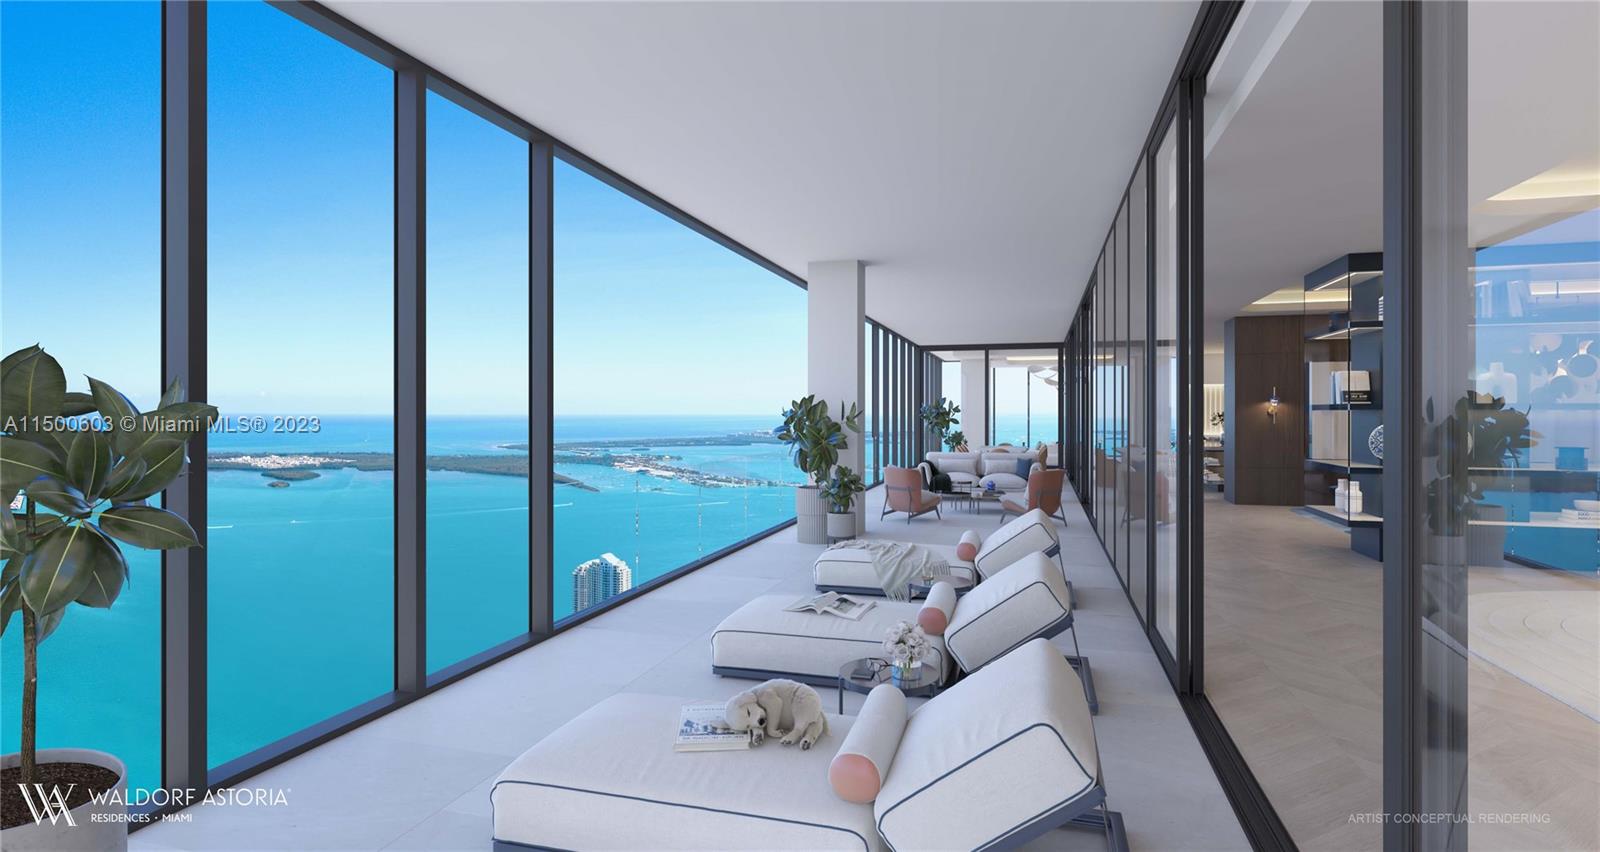 A Legacy Penthouse. Nestled atop Miami's most iconic tower sits the limited penthouse collection at Waldorf Astoria. These residences are completely adorned with the most pristine and luxurious touches synonymous with Waldorf Astoria's legacy. Every detail has been reimagined for a home that exceeds even the highest of expectations.

PLEASE SEE ATTACHMENTS FOR FLOORPLAN AND BROCHURE!